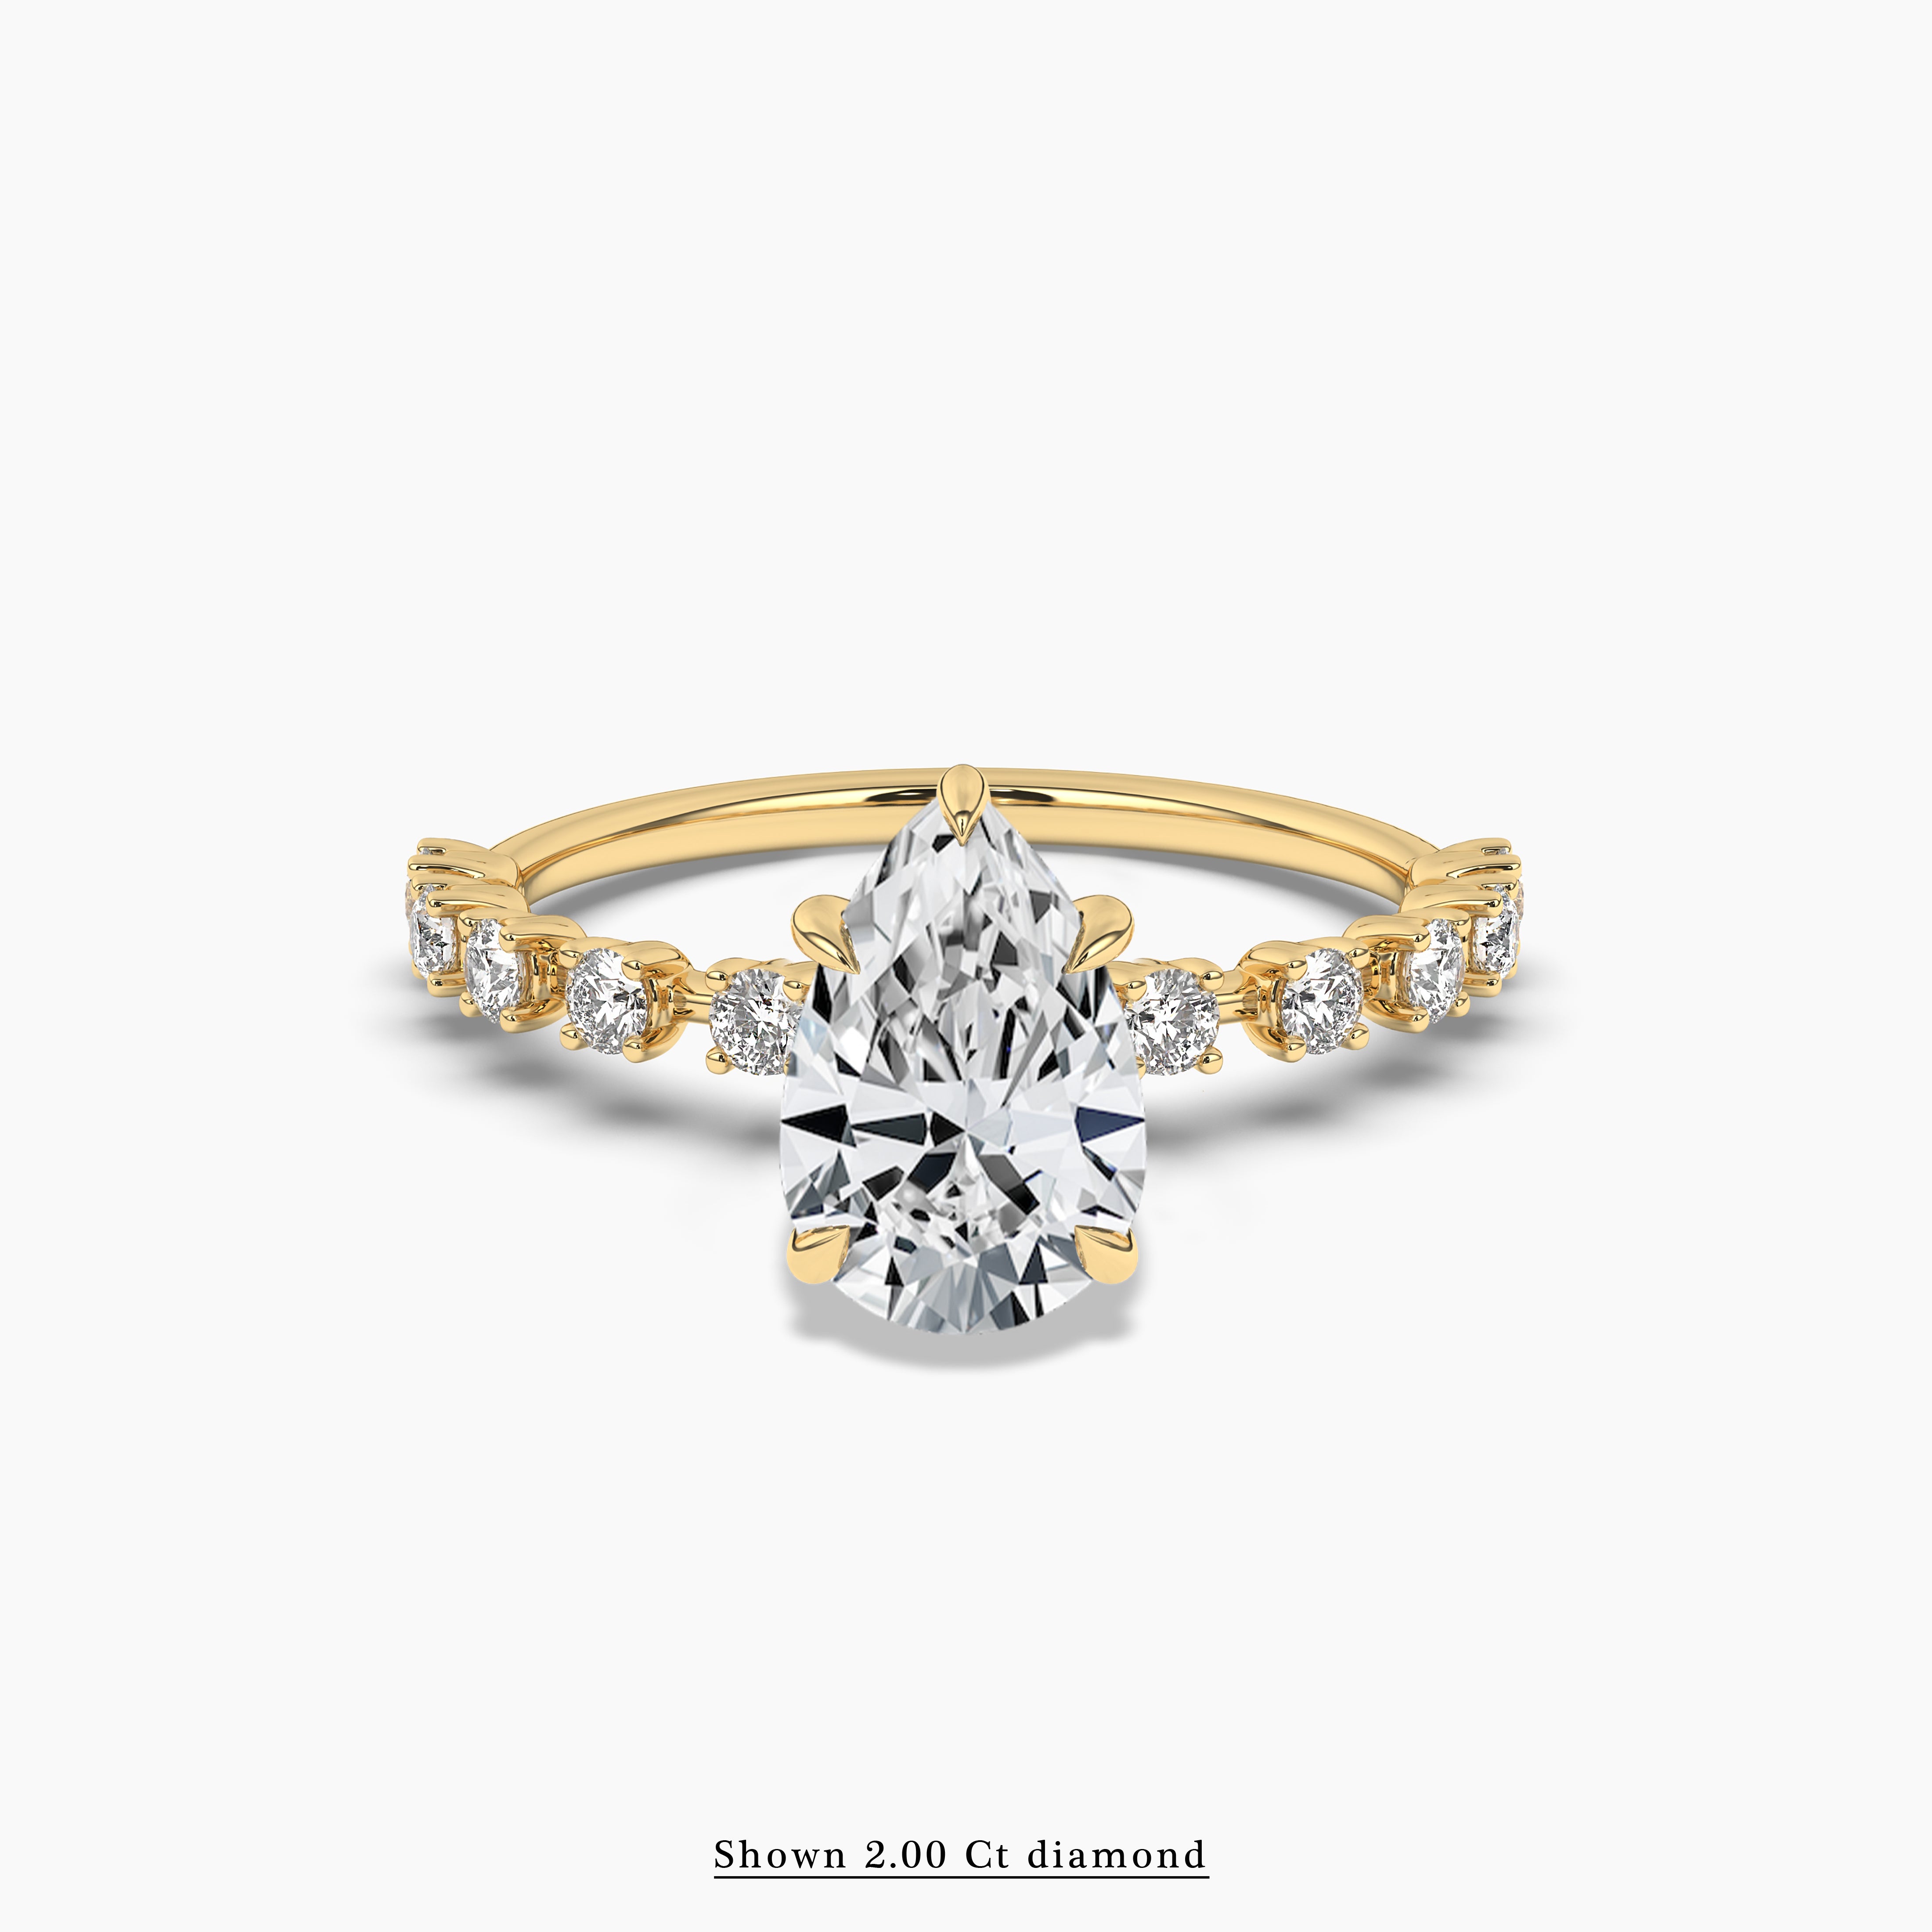 2.00ct Pear shaped diamond engagement ring